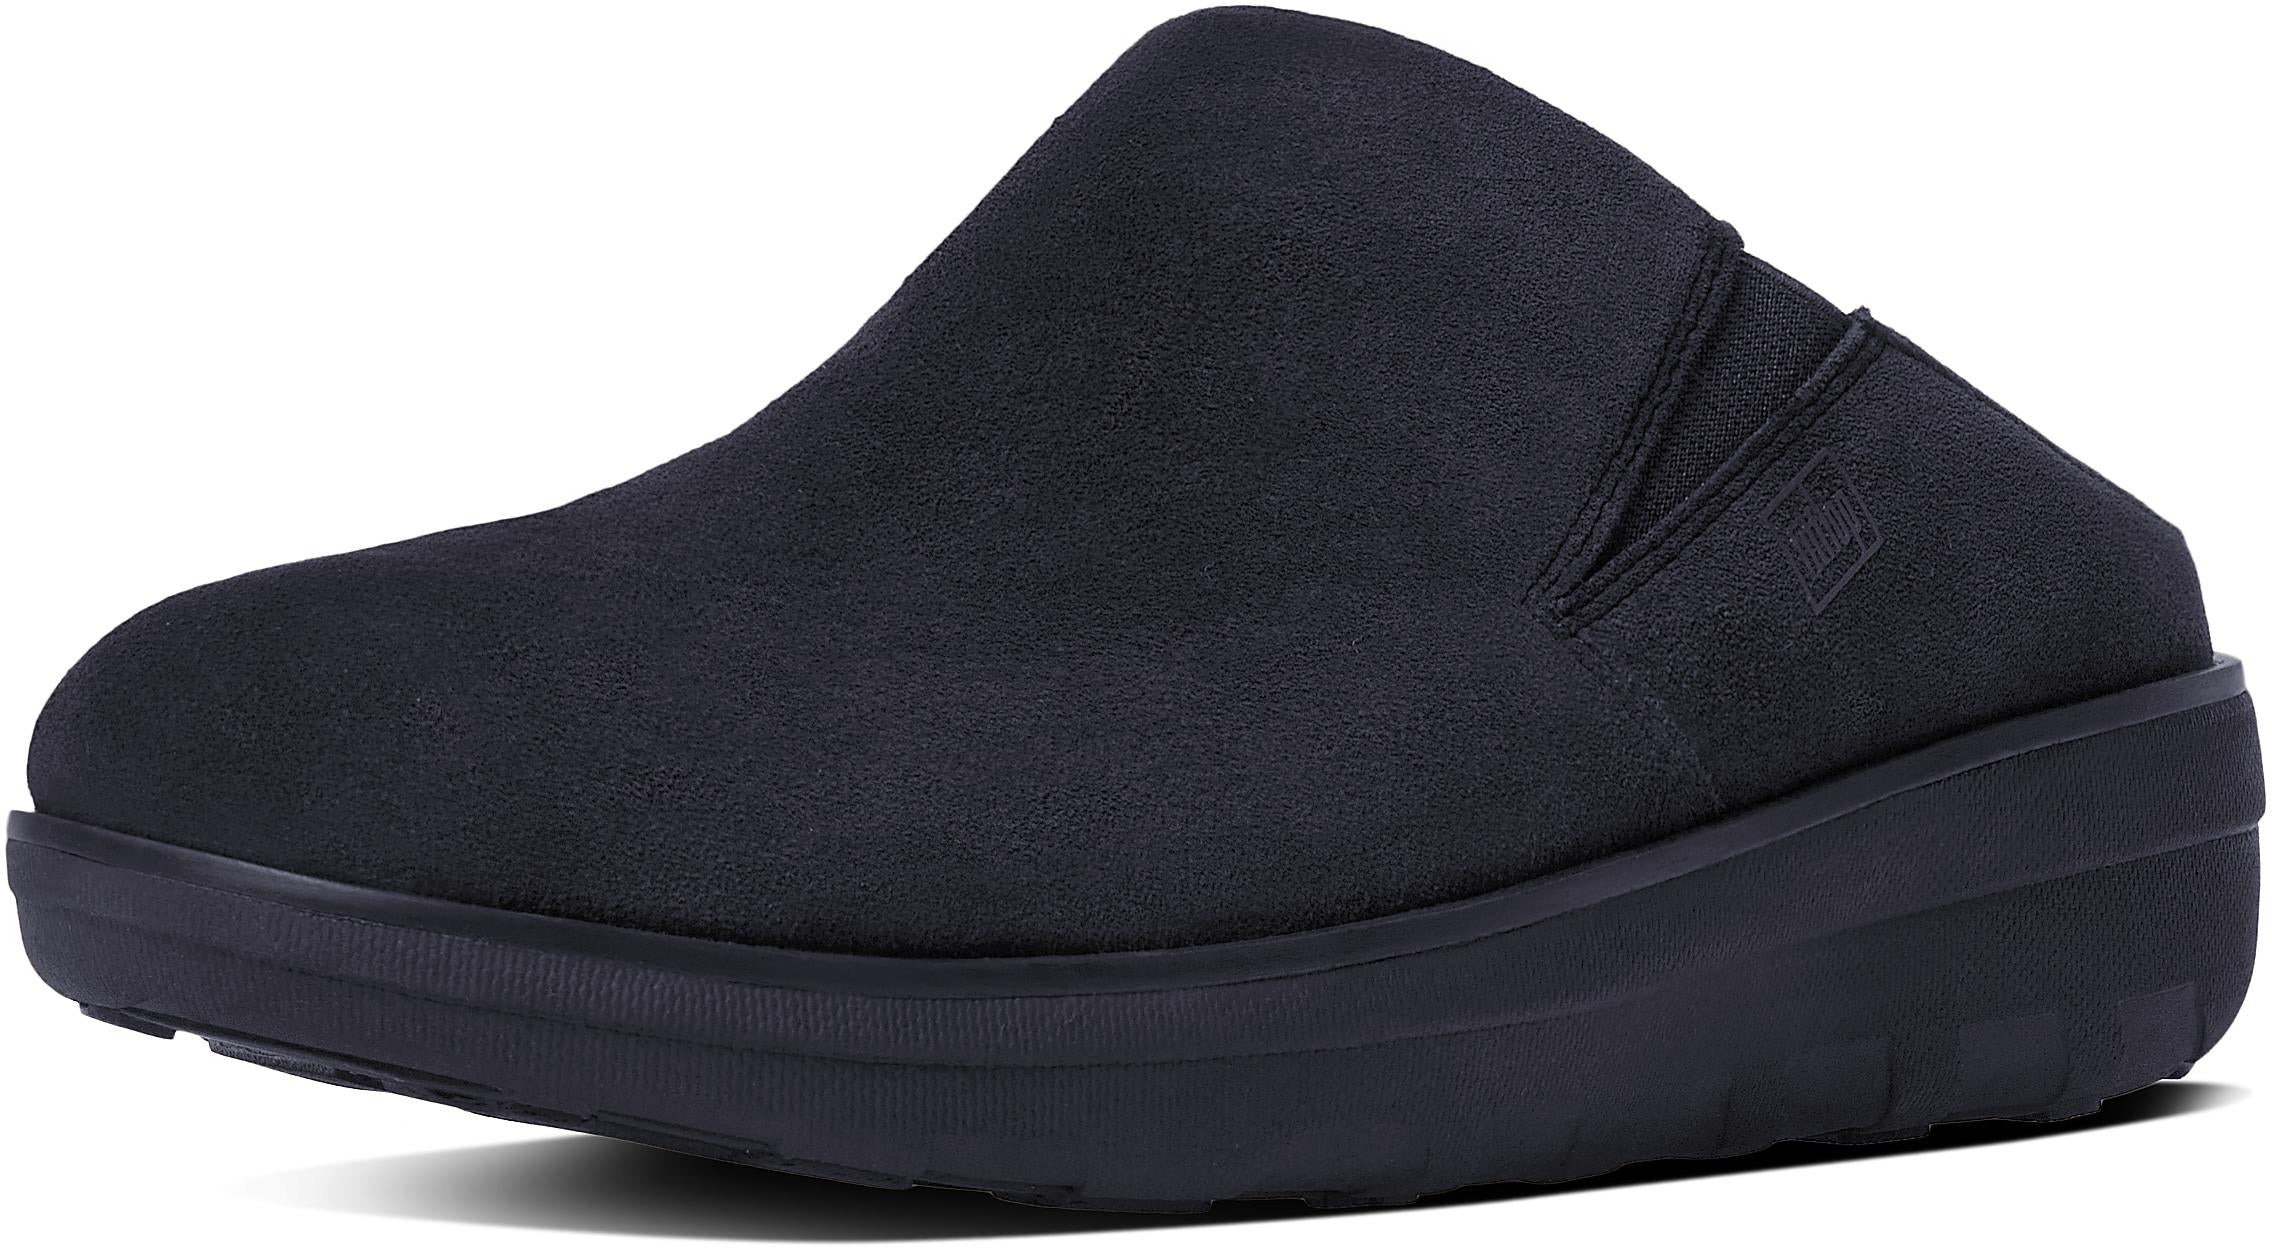 Loaff Suede Clogs in Supernavy from the side